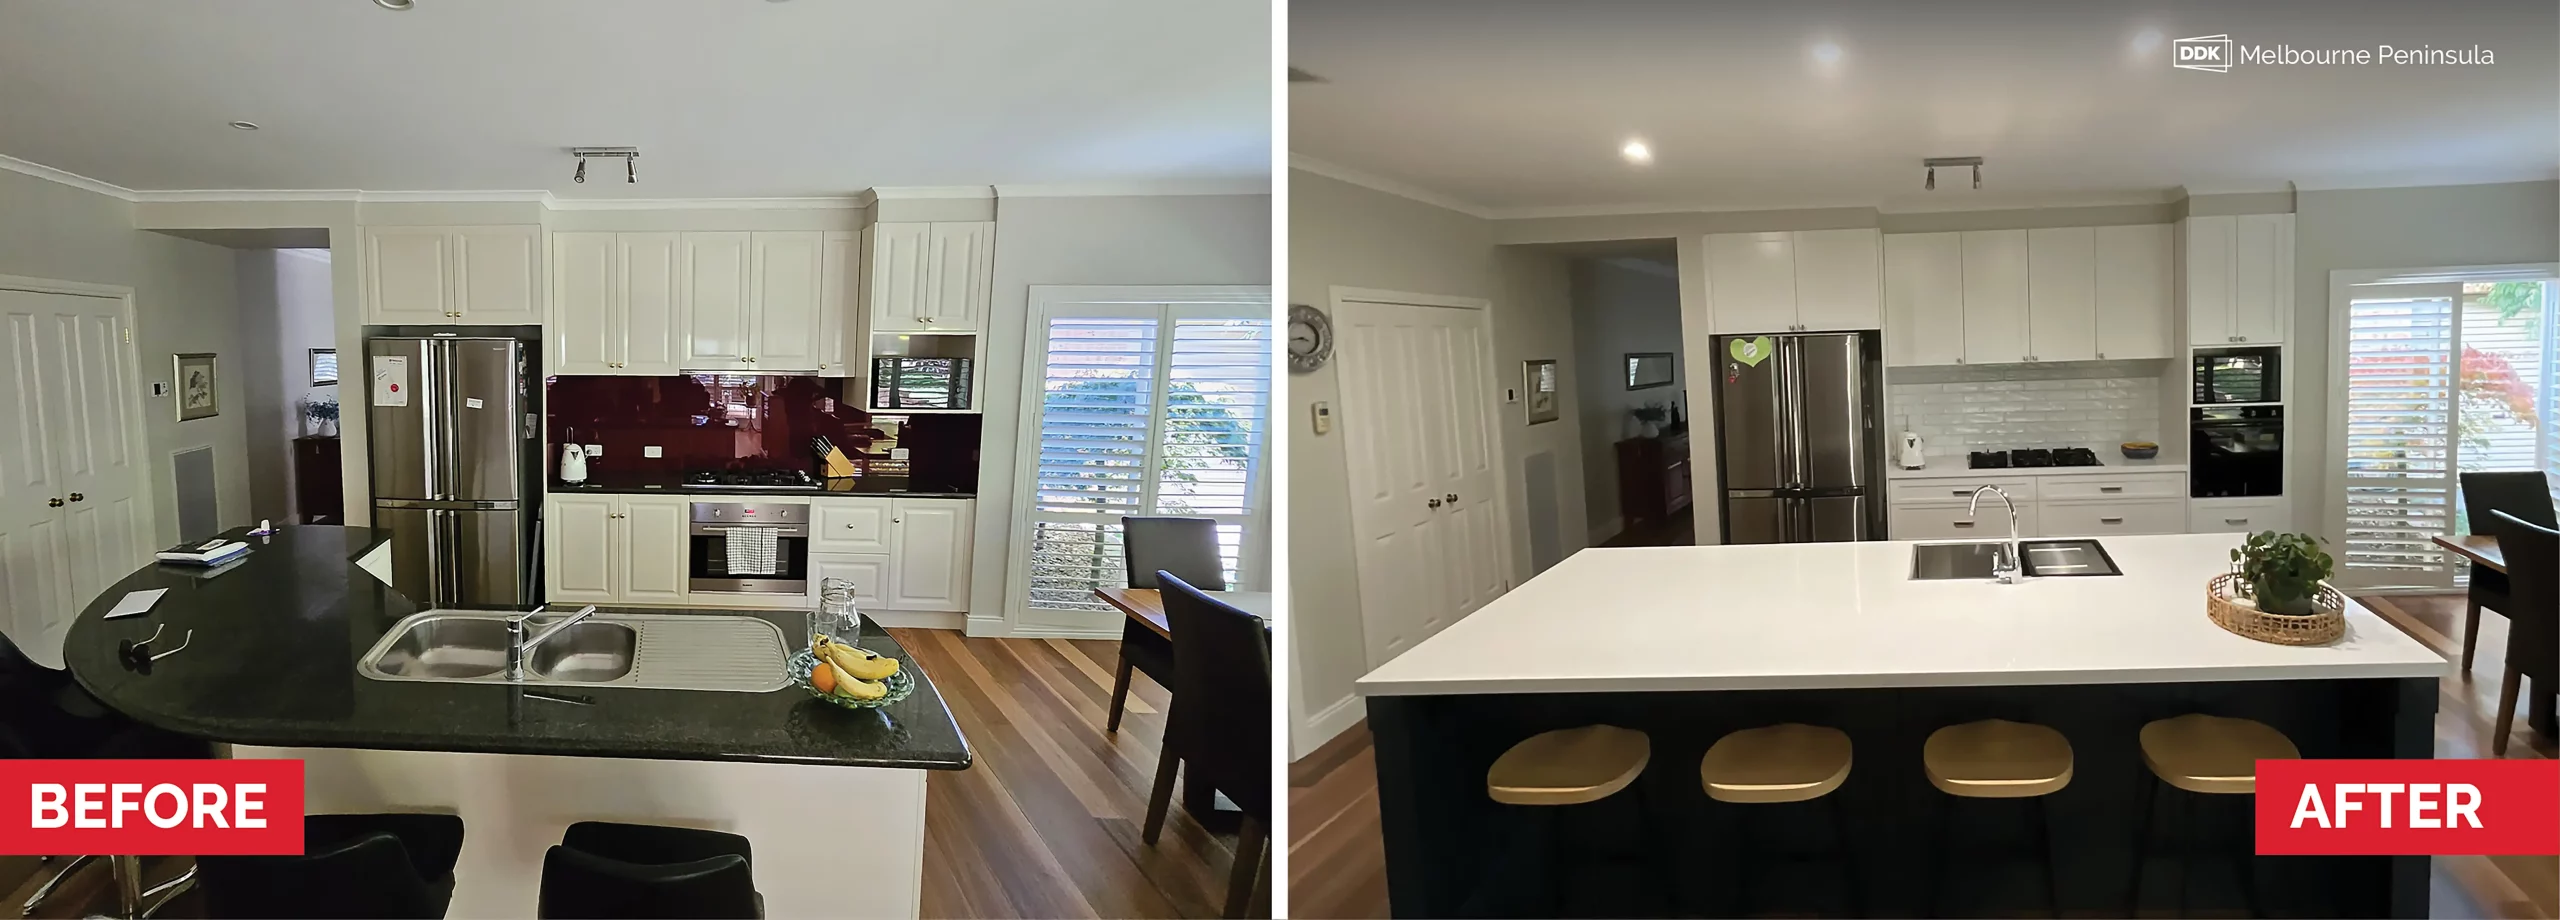 DDK Melbourne Peninsula Before and After